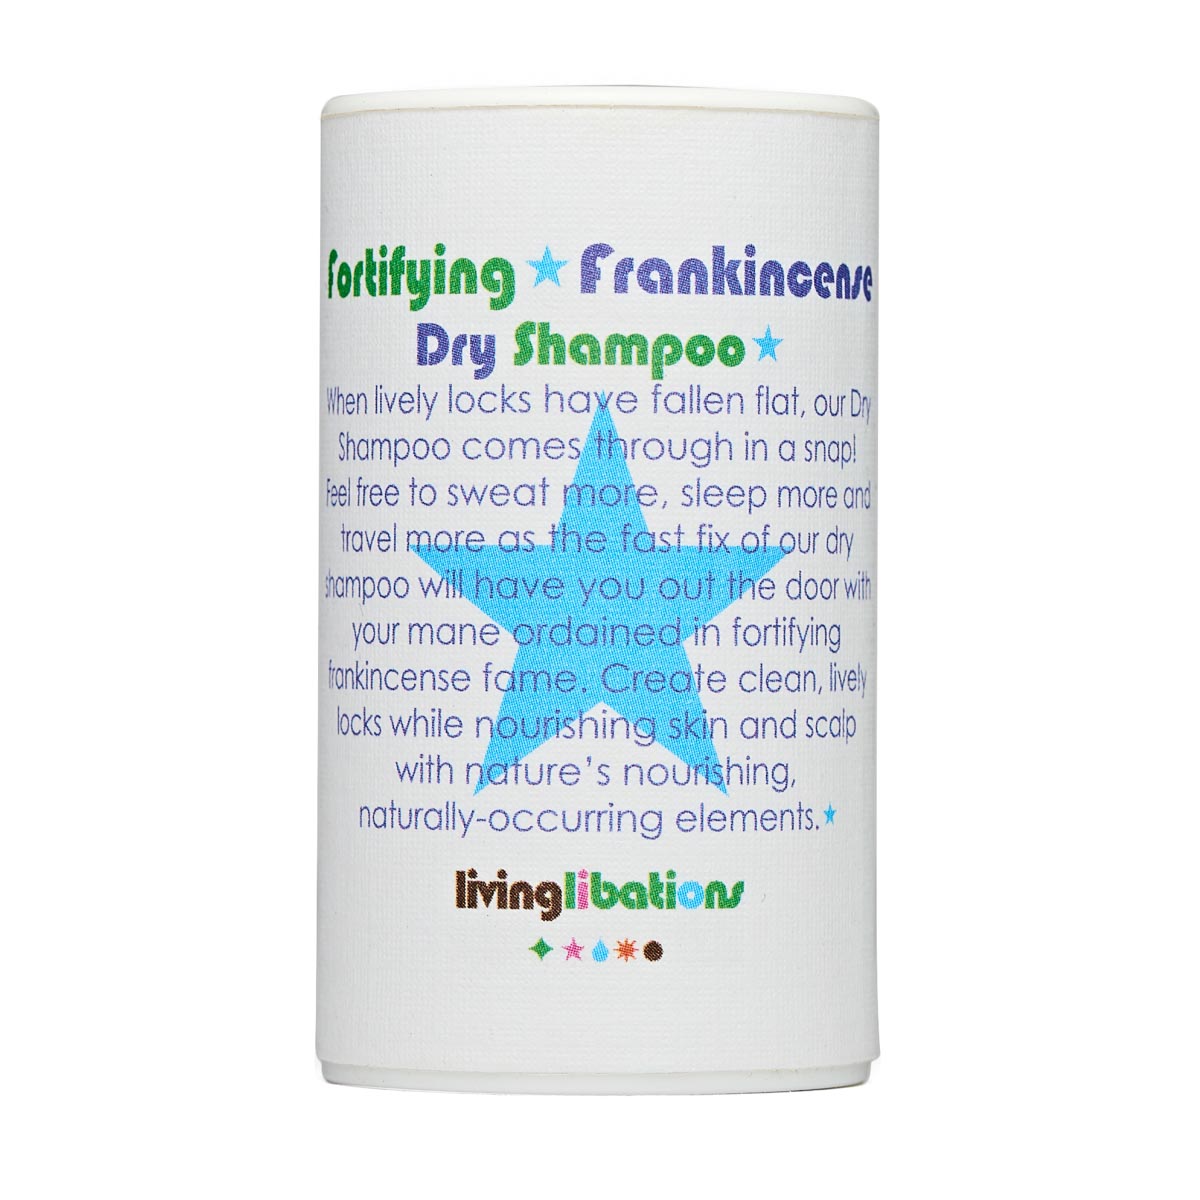 Fortifying Frankincense Dry Shampoo | Living Libations | Raw Living UK | Hair Care | Beauty | Living Libations Dry Shampoo Fortifying Frankincense (30ml): a High Quality Vegan Dry Shampoo full of Natural Minerals, Botanicals &amp; Essential Oils.